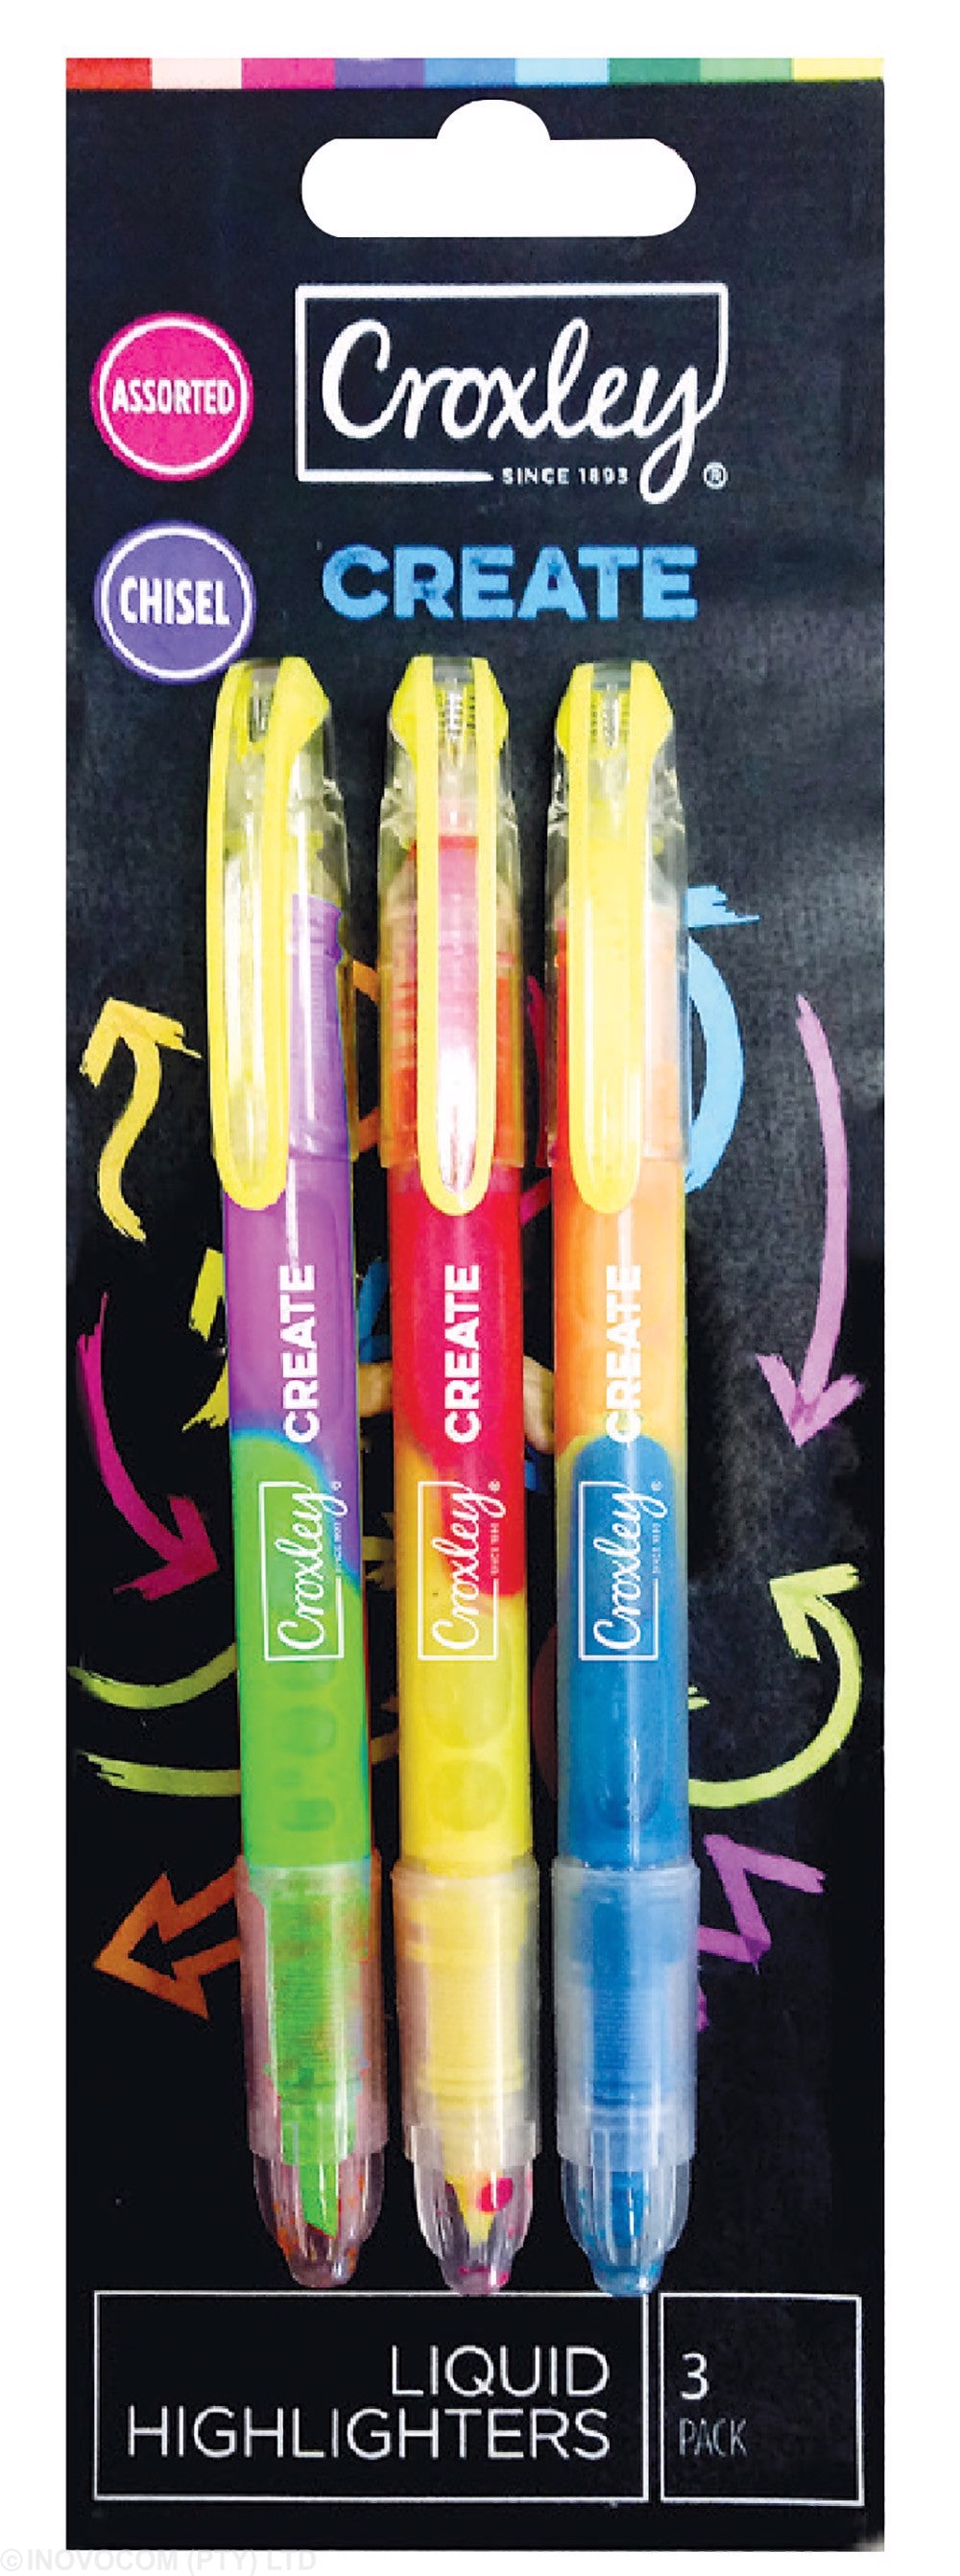 Croxley Create Liquid Highlighters Carded Card Of 3 Assorted